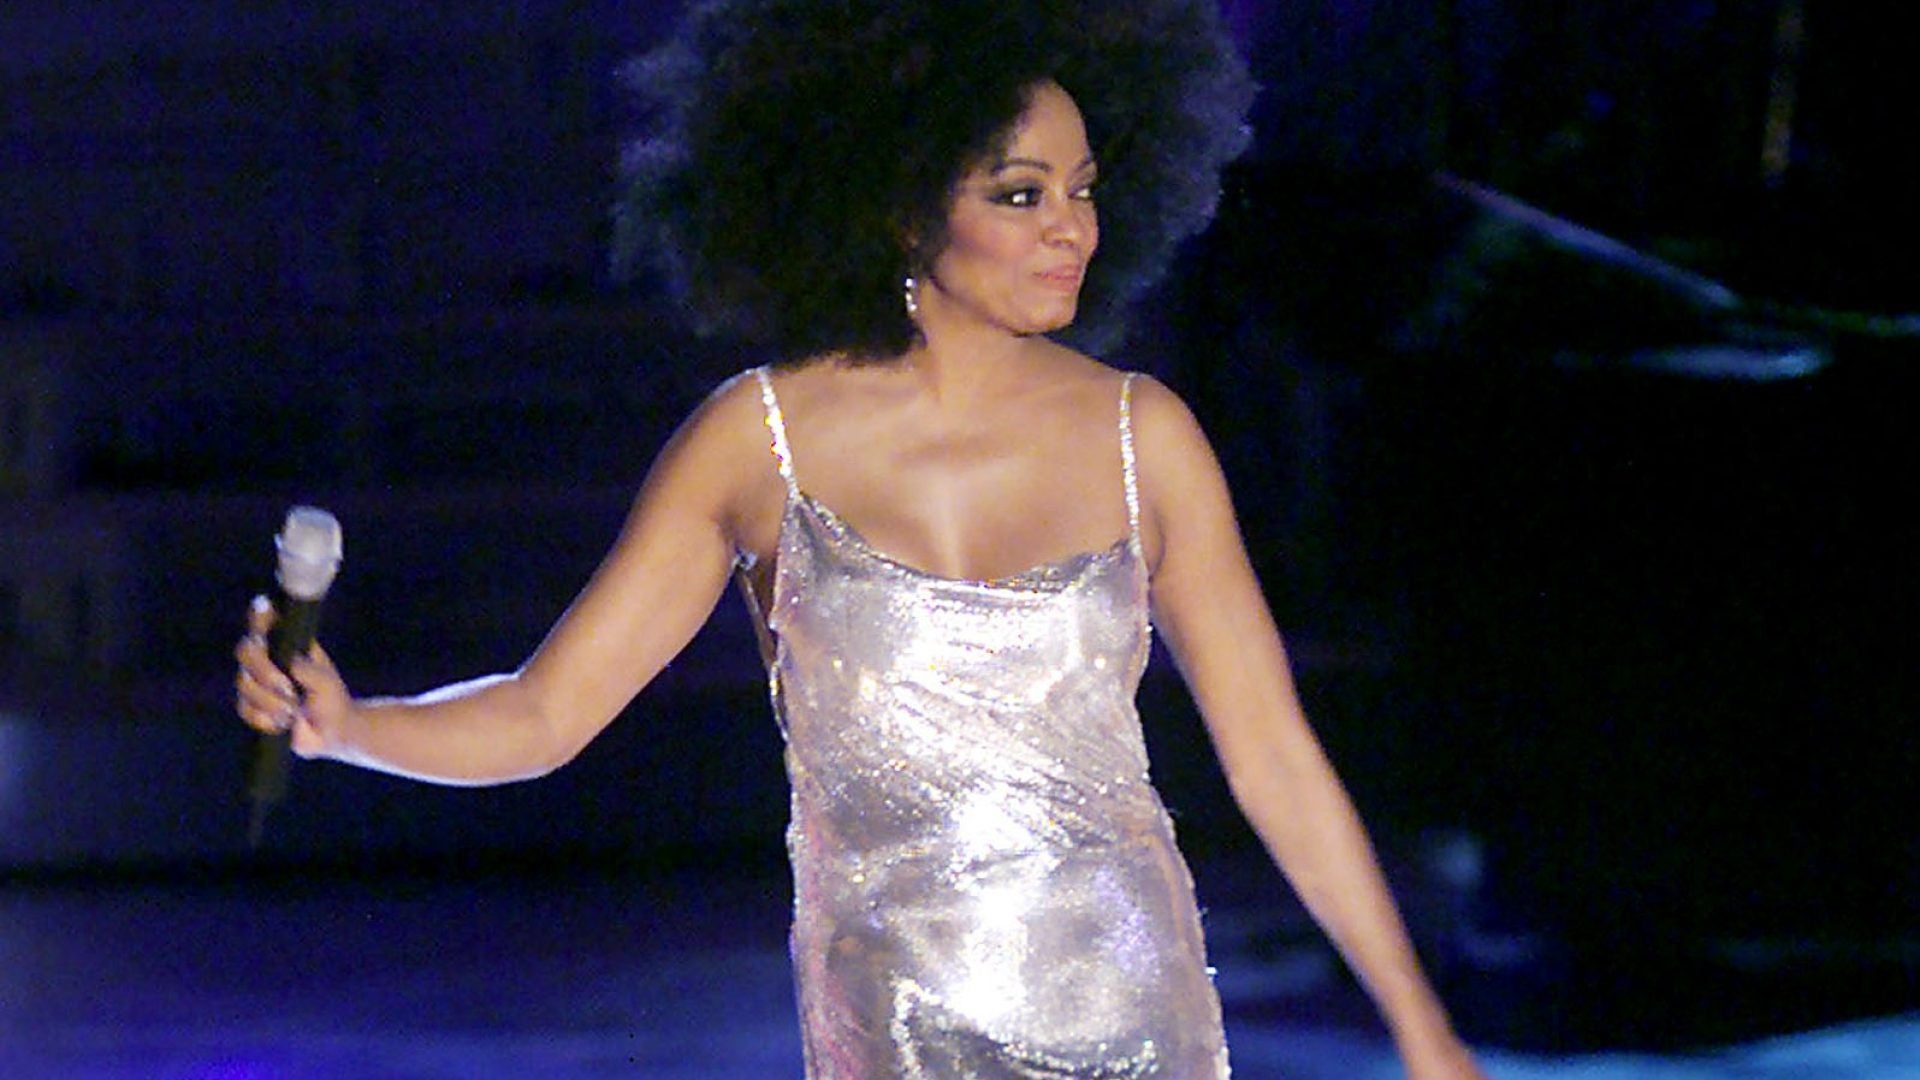 Channeling Nostalgia With This Celebrity Look: Diana Ross